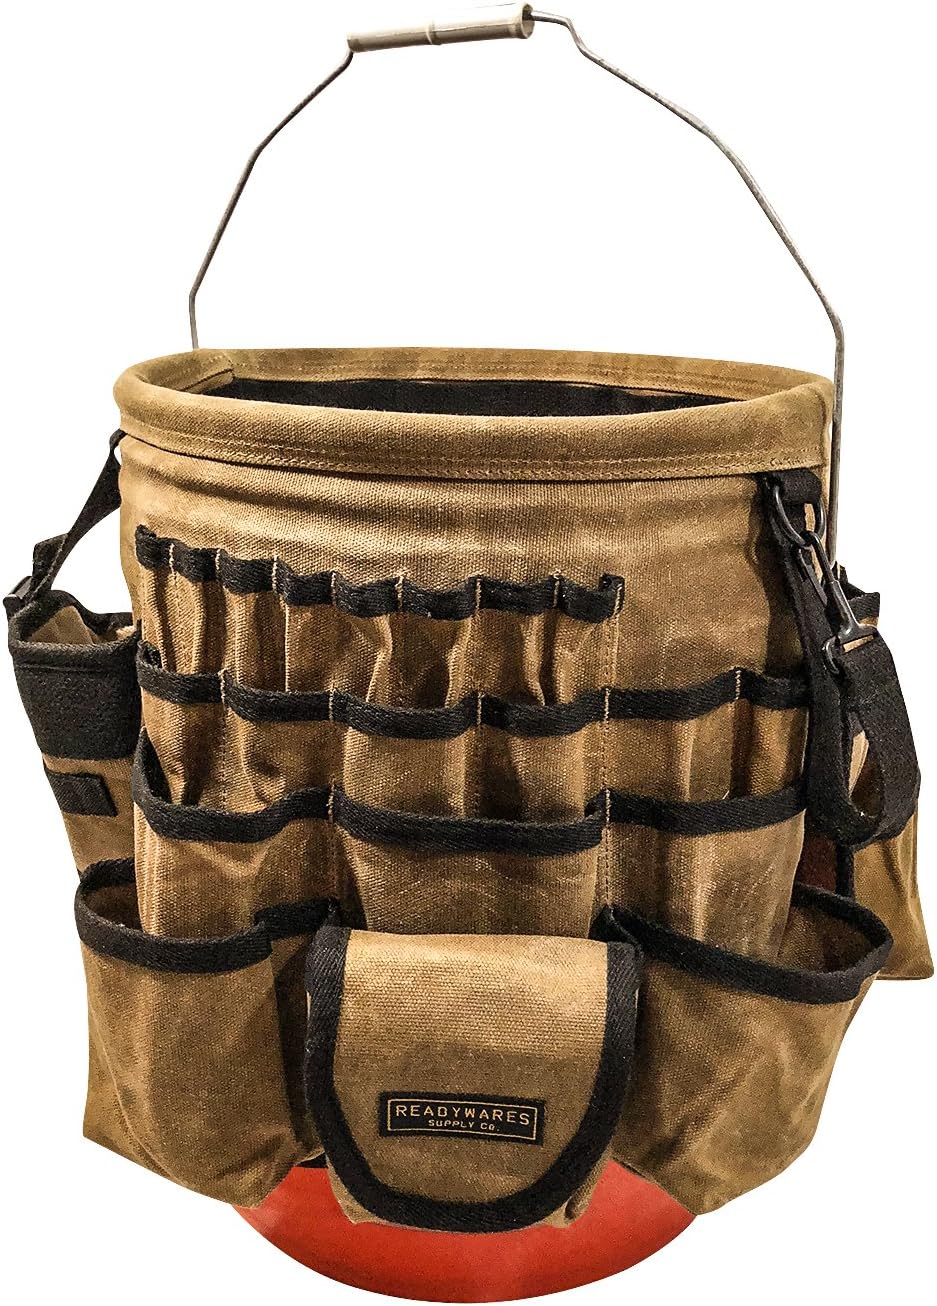 Readywares Waxed Canvas Tool Bucket Organizer, Heavy Duty with 58 Pockets,  Designed to Fit a Standard 5 Gallon Bucket